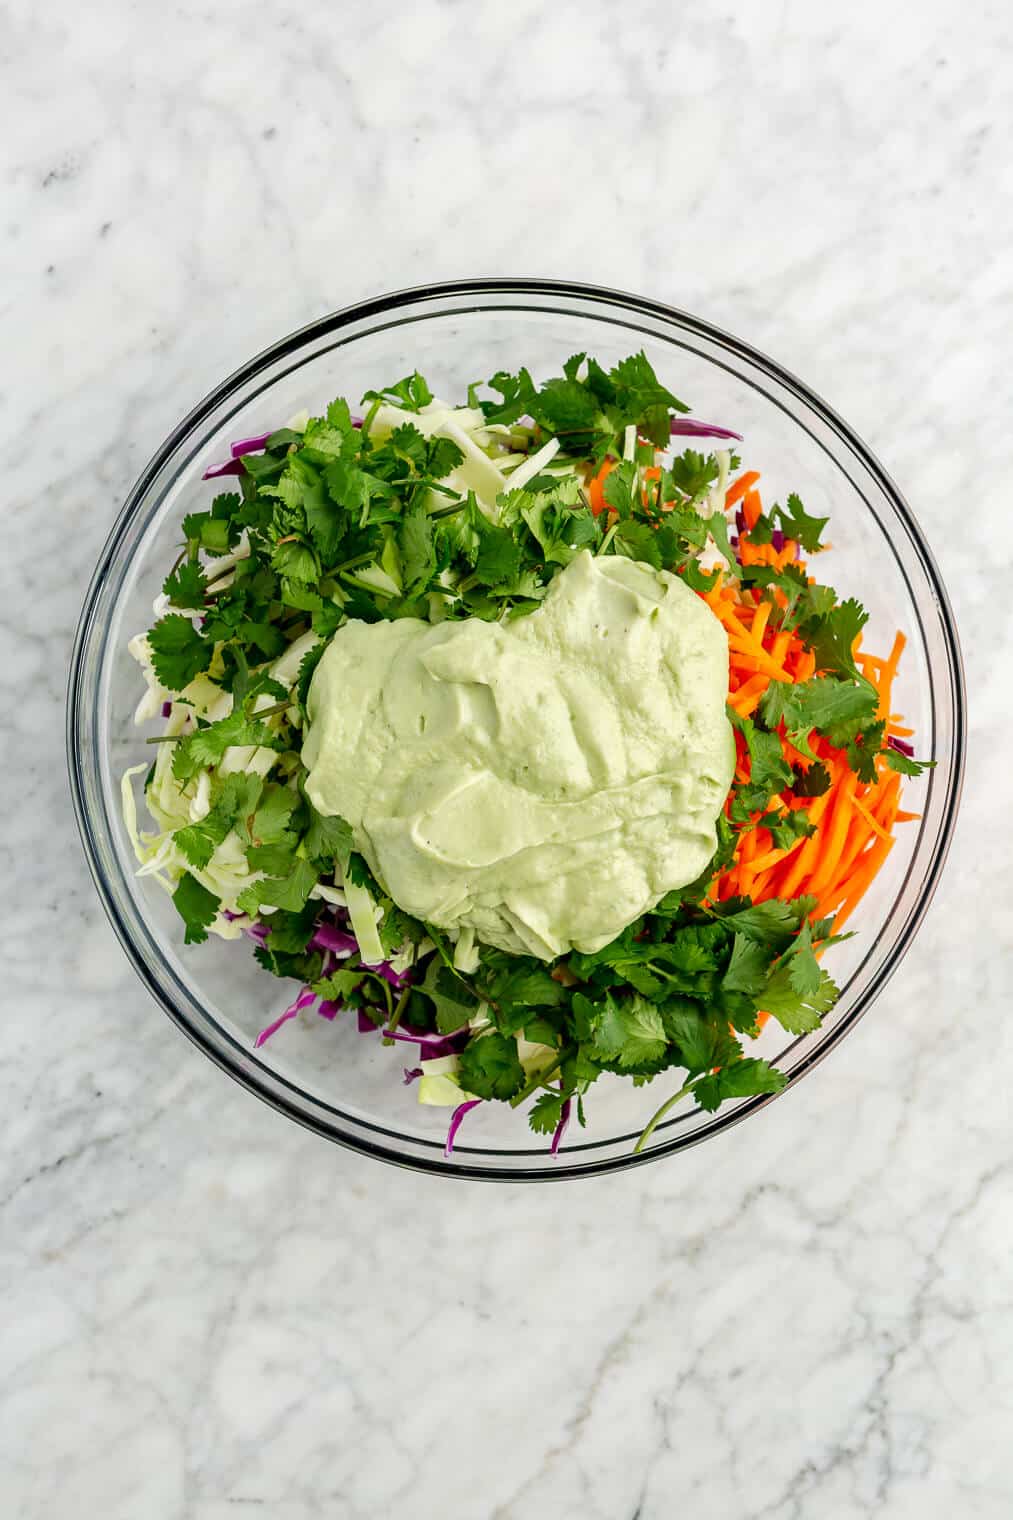 Slaw ingredients in a large glass bowl topped with avocado cream sauce on a grey and white marble surface.